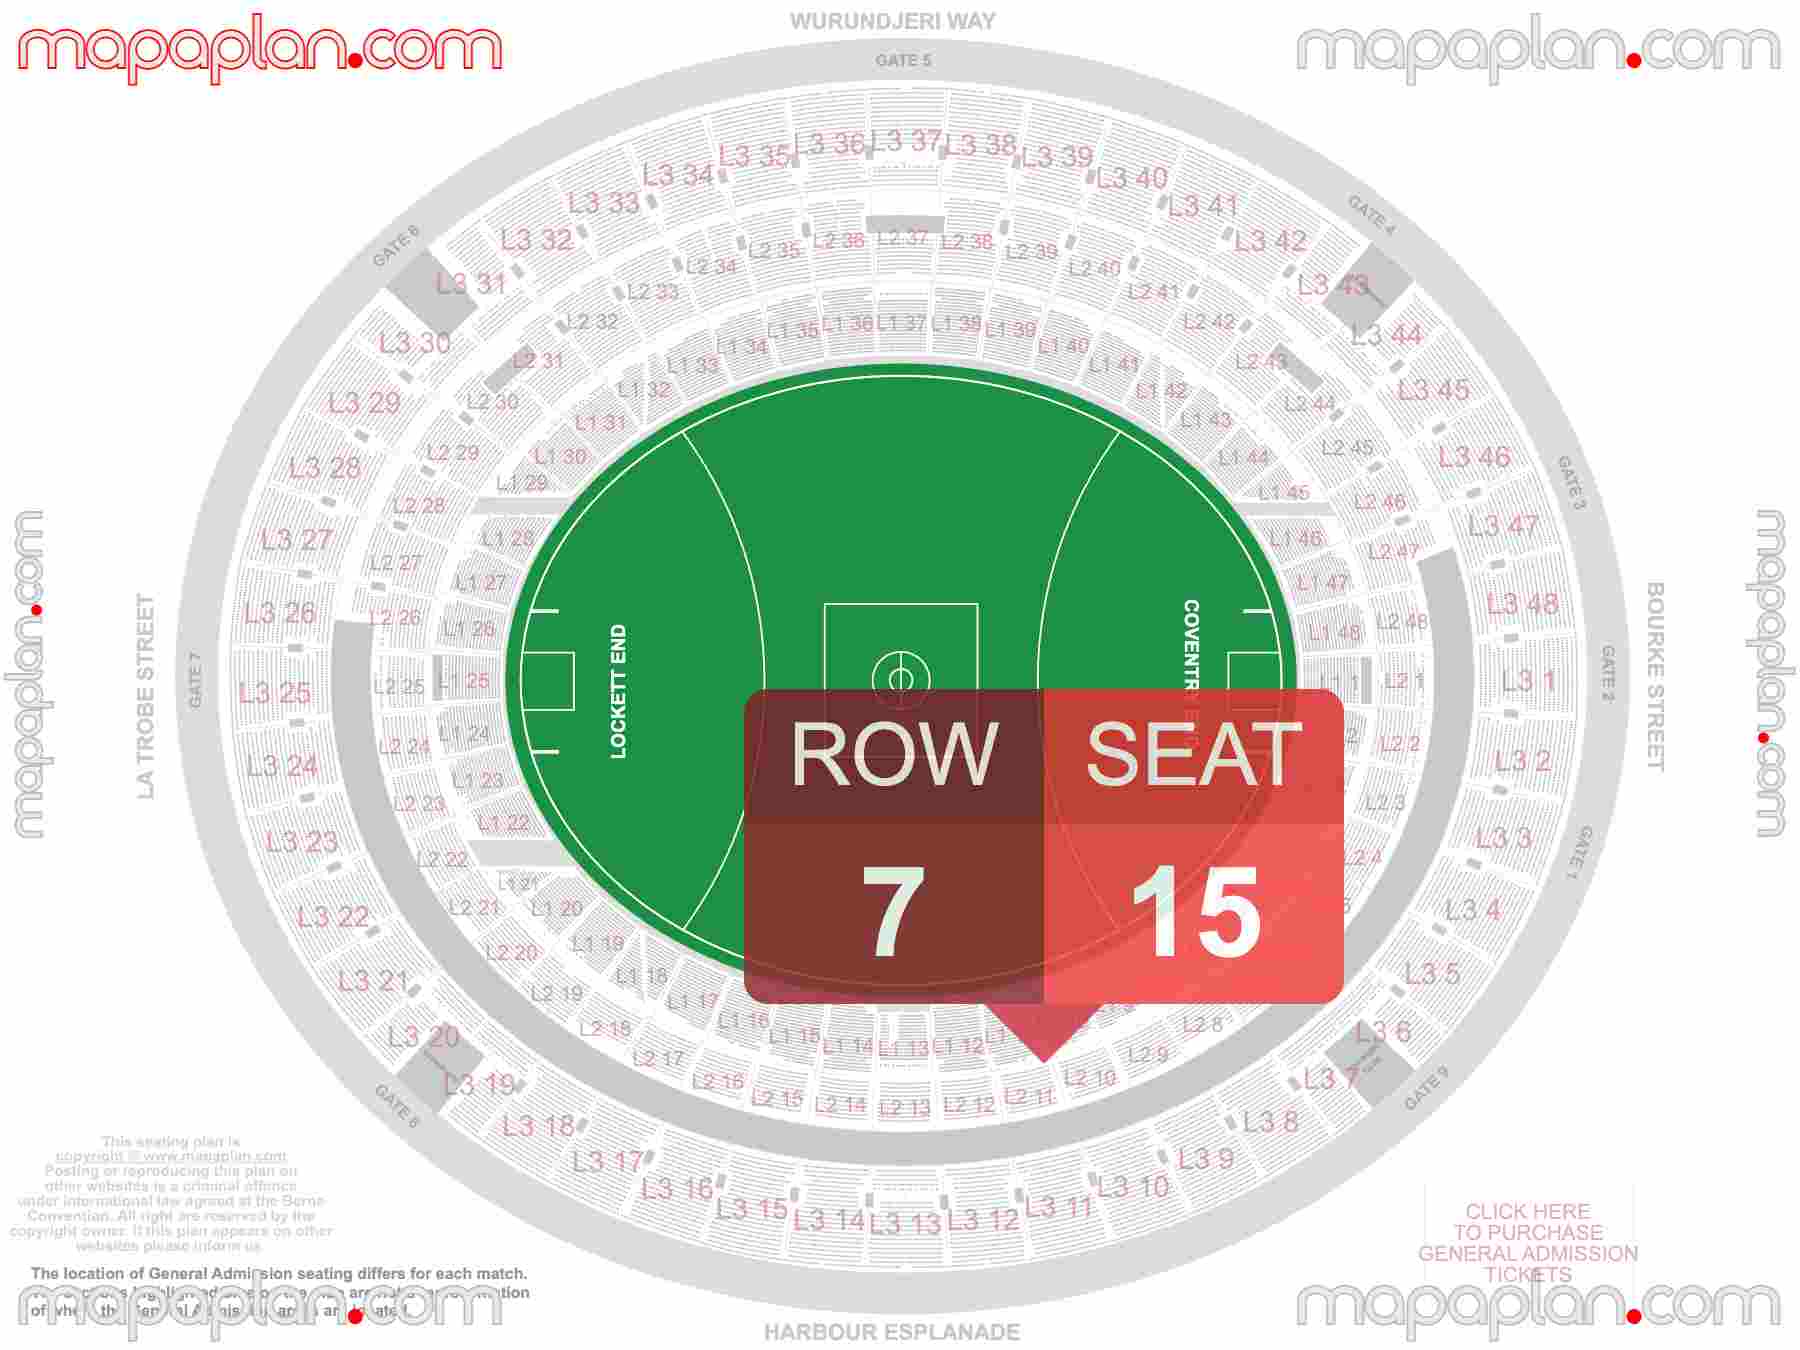 Melbourne Marvel Stadium seating map Football detailed seat numbers and row numbering map with interactive map plan layout